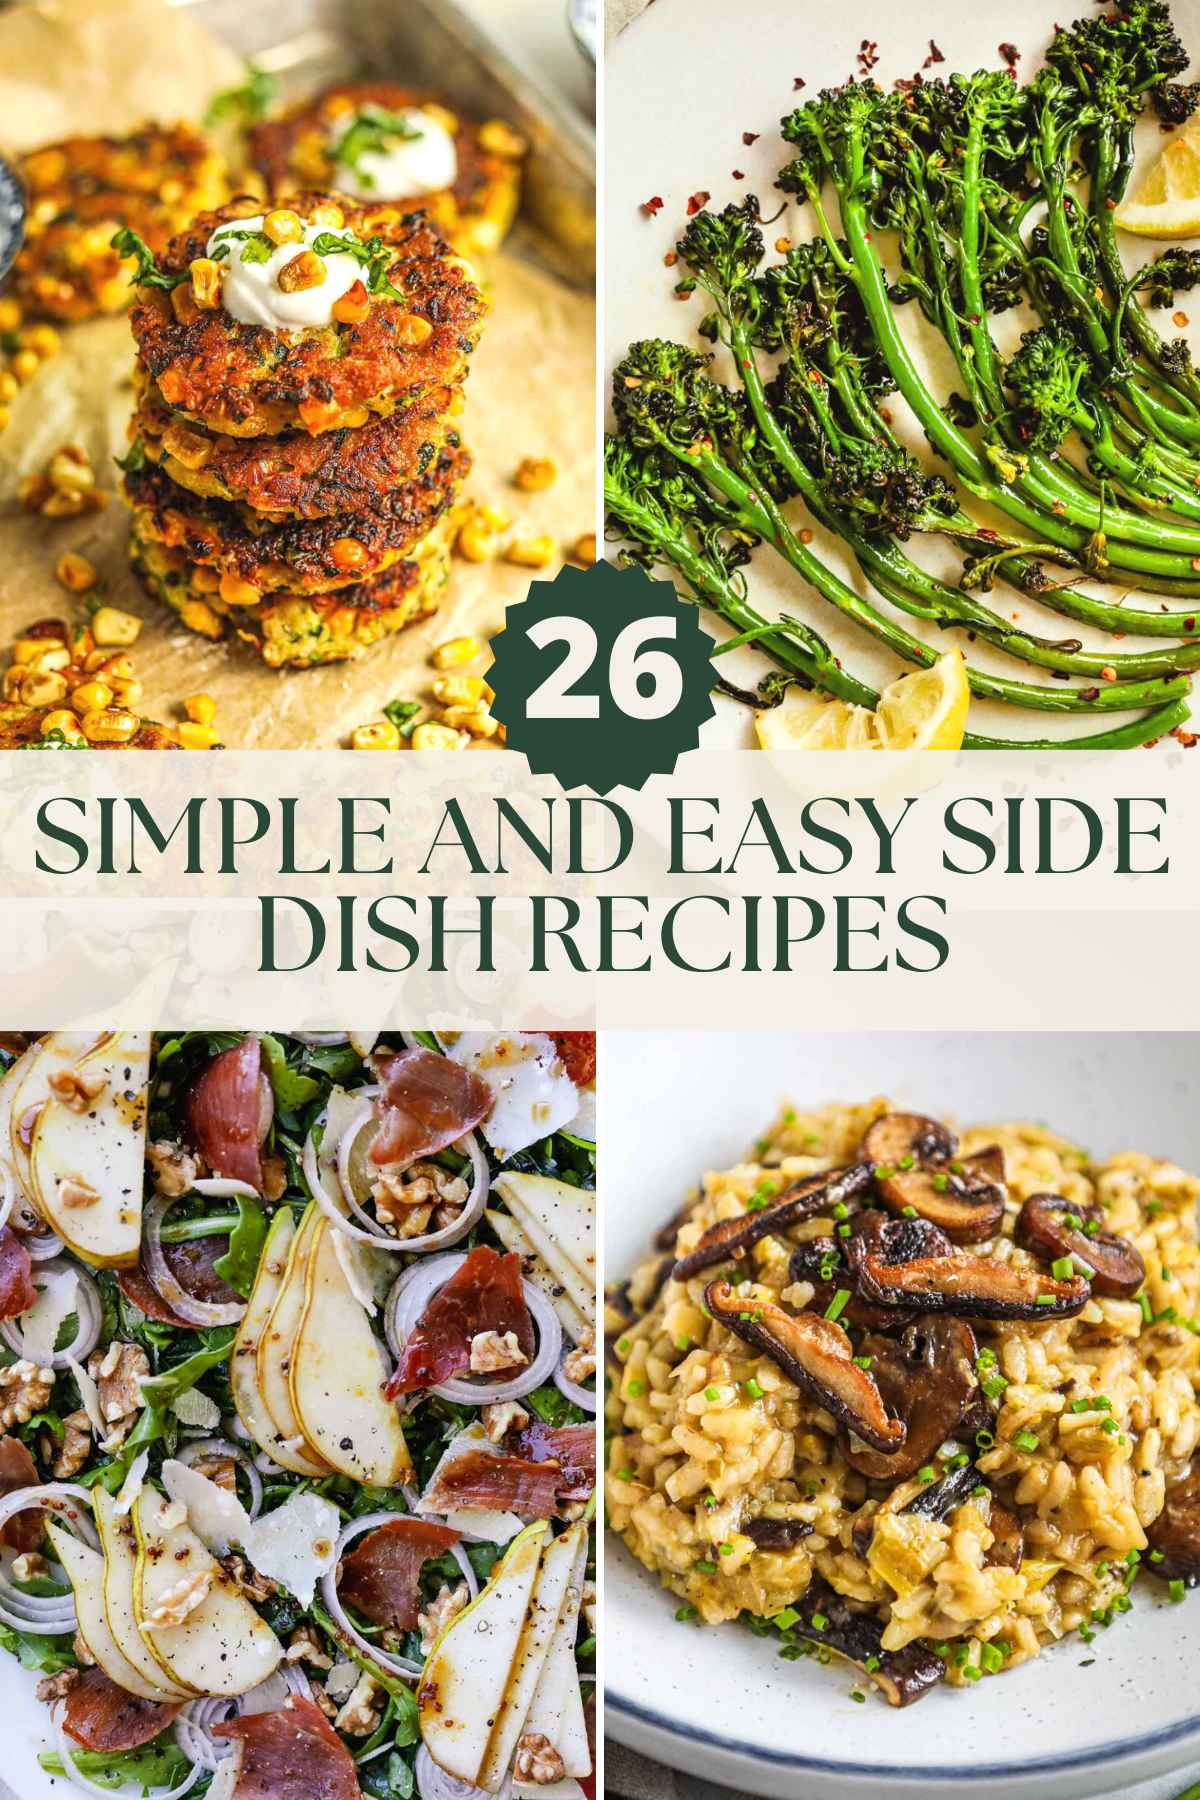 26 simple and easy side dish recipes, corn fritters, broccolini, prosciutto and pear arugula salad, and truffle mushroom risotto, and more.